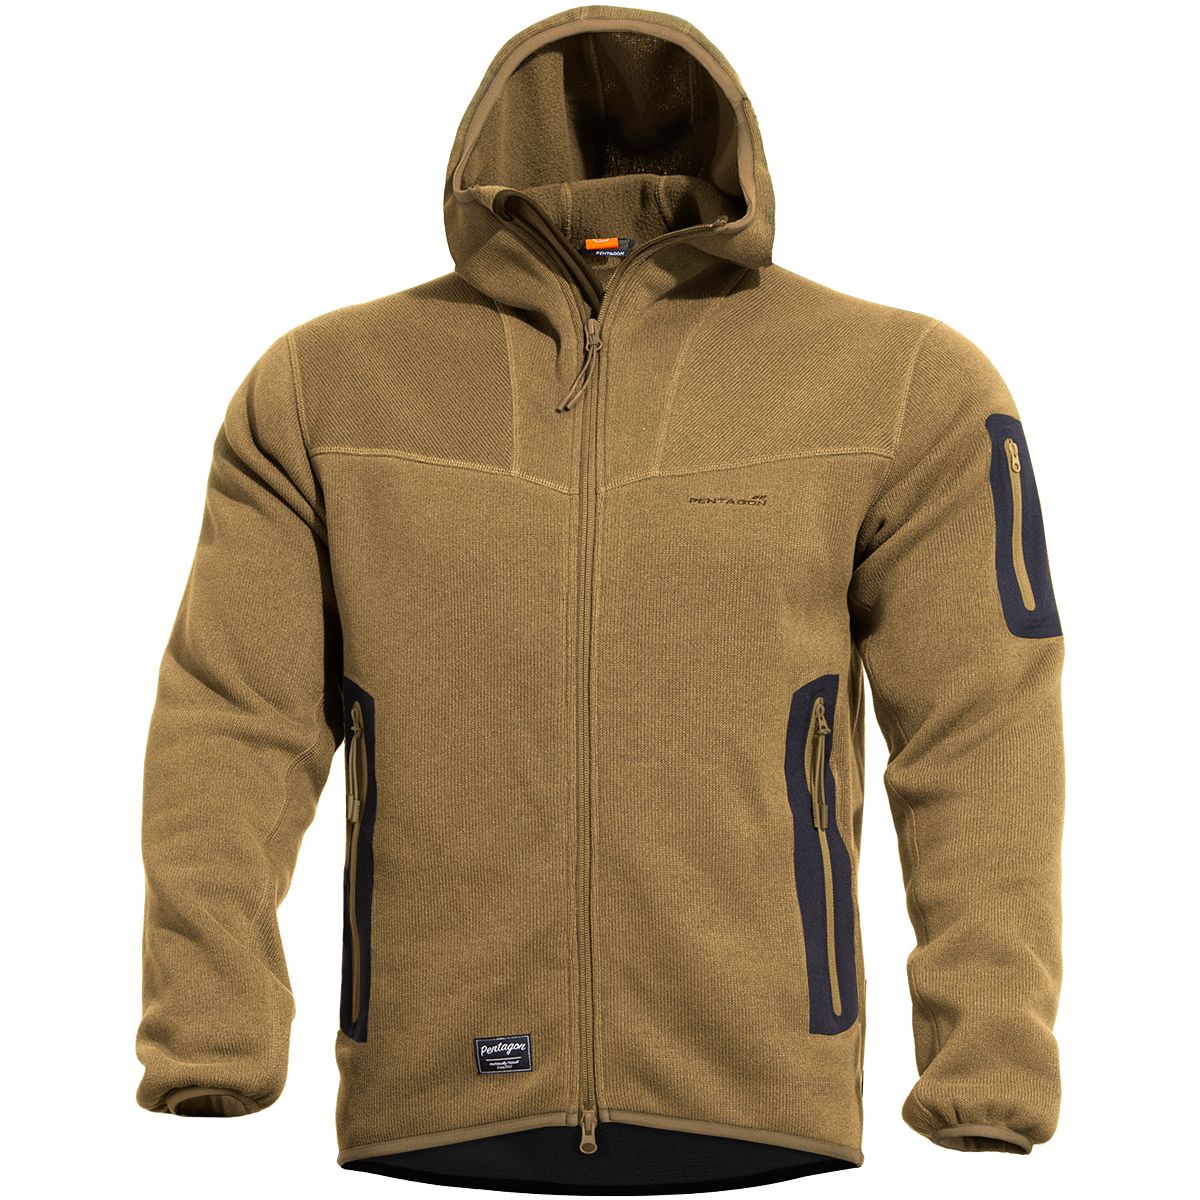 Good Gear to Go - FALCON PRO SWEATER from Pentagon - Airsoft Action ...